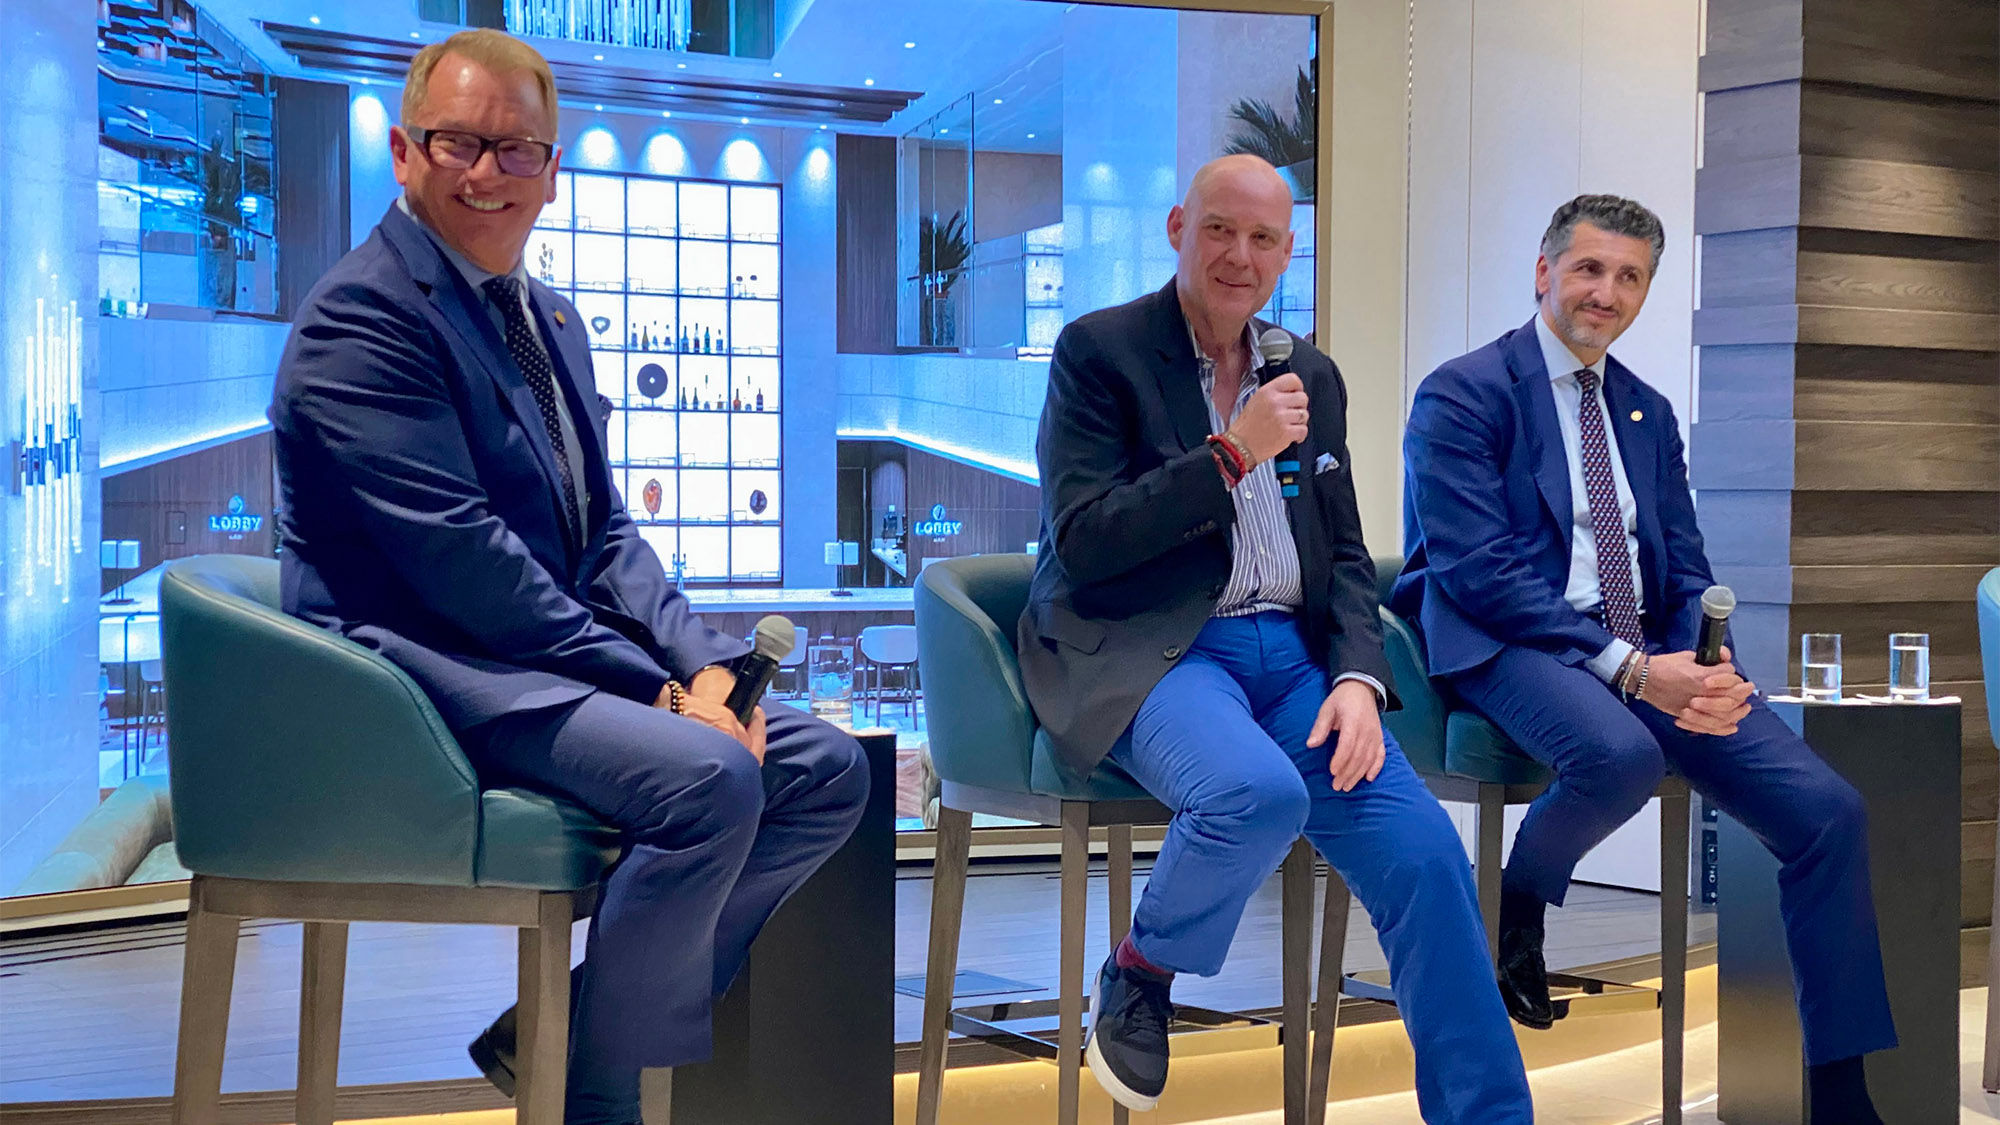 Explora Journeys chief sales officer Chris Austin, CEO Michael Ungerer and chief commercial officer Achille Staiano, onboard the Explora 1 in New York.